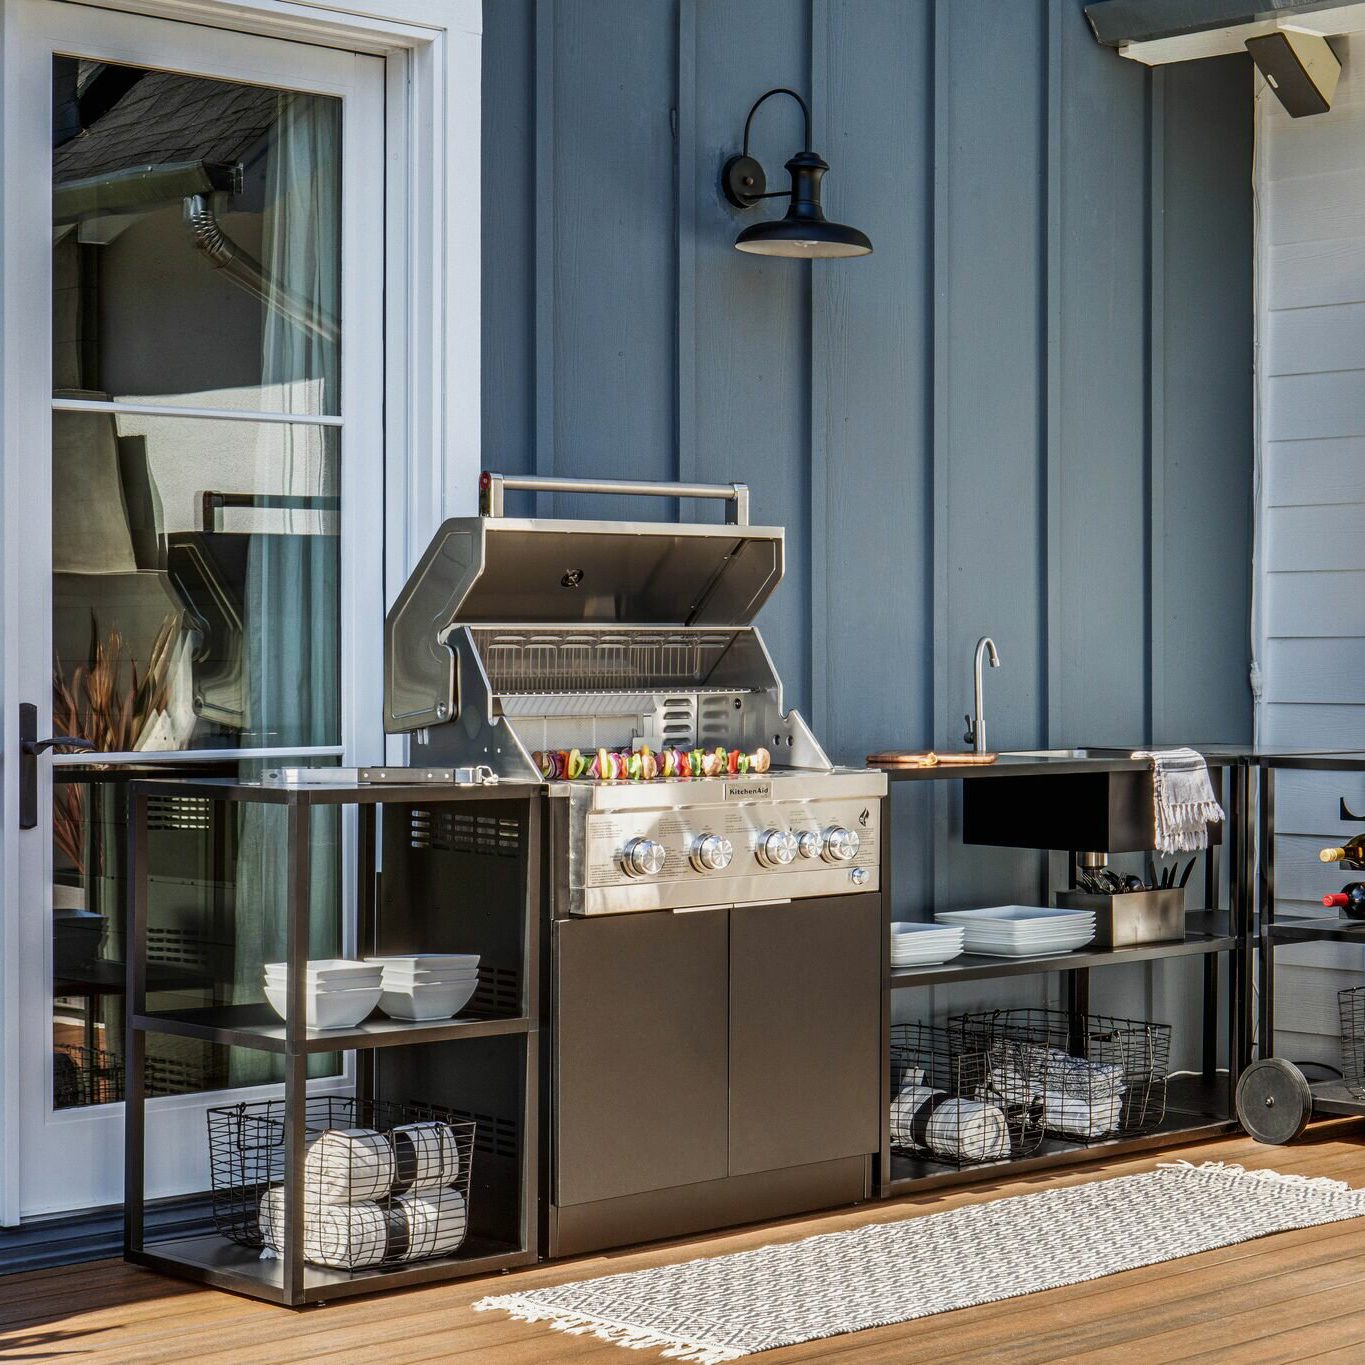 The best appliances for your outdoor kitchen - Texas Custom Patios